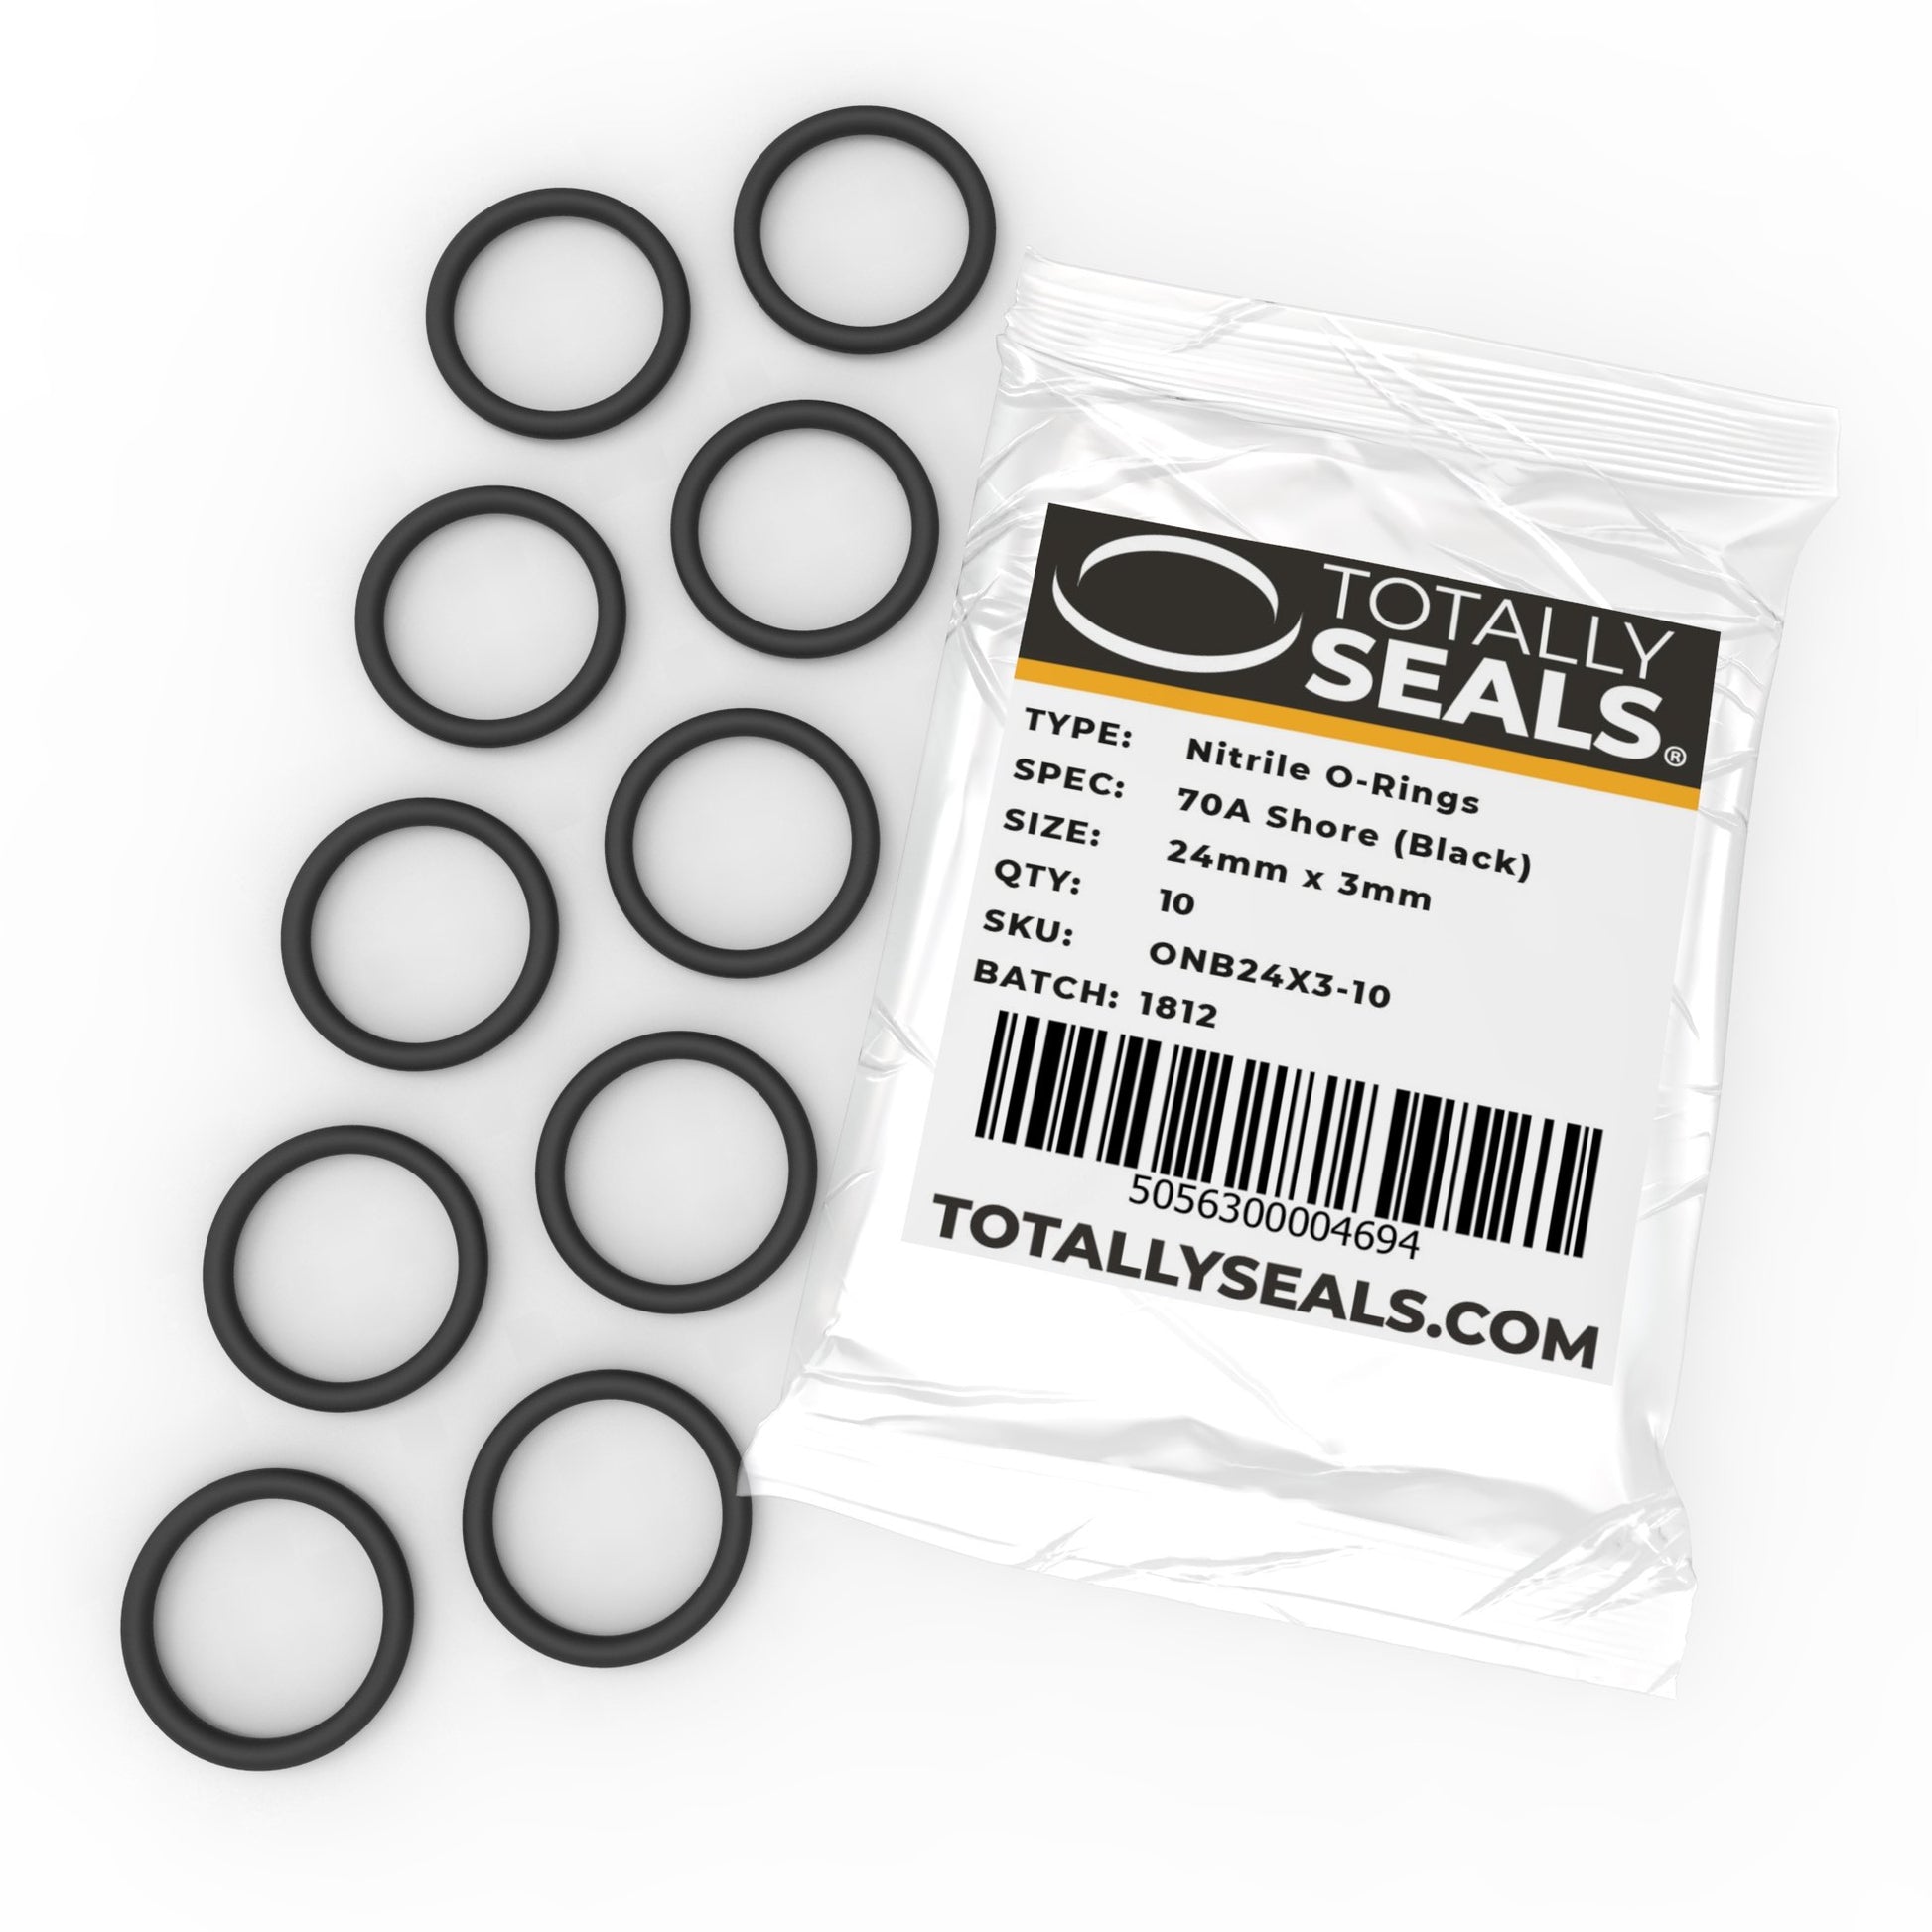 24mm x 3mm (30mm OD) Nitrile O-Rings - Totally Seals®